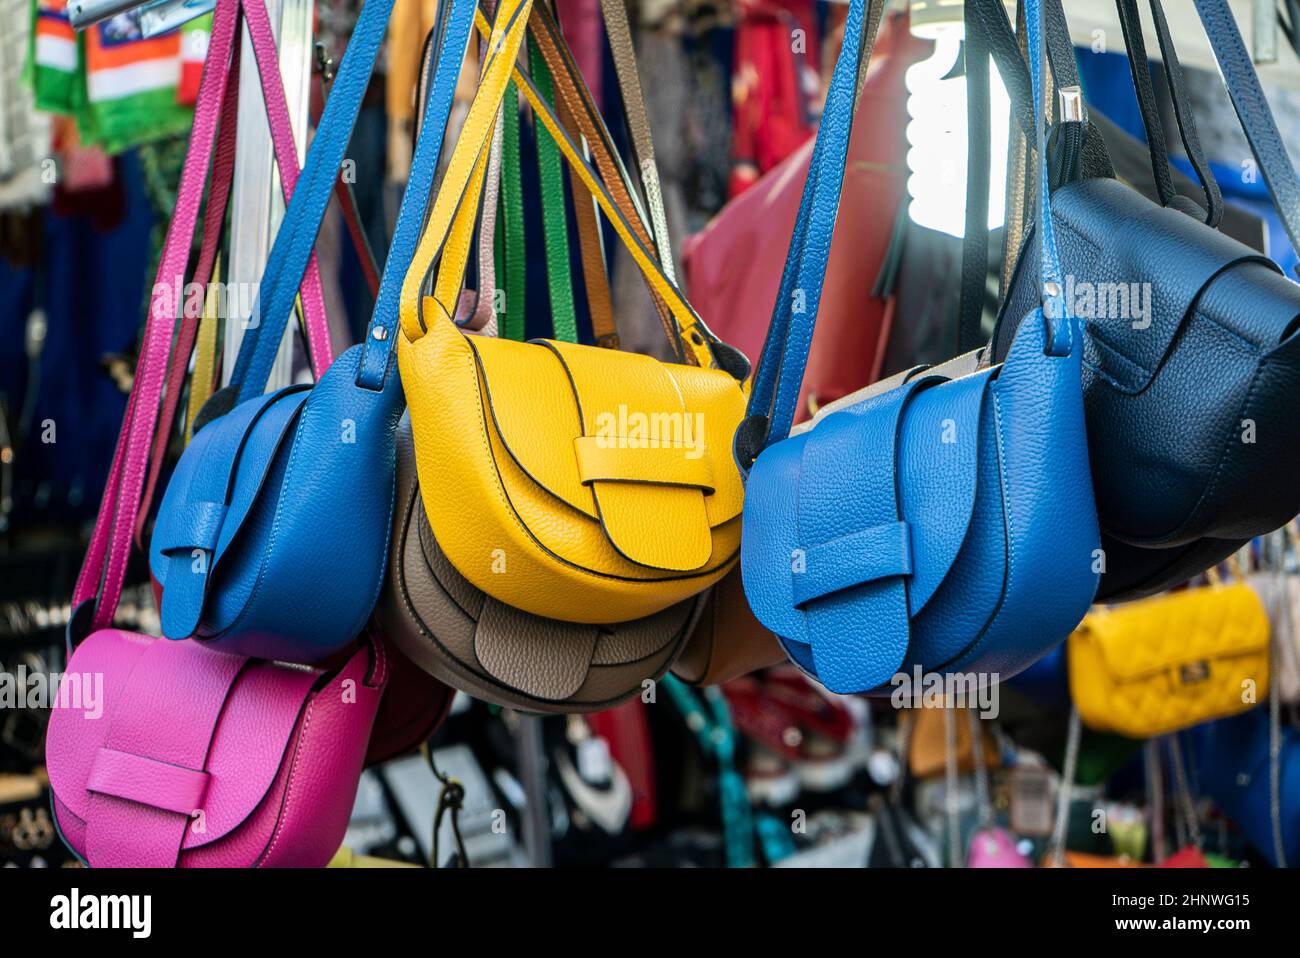 many leather purse bags vibrant colors hanging on display in shopping street market 2HNWG15